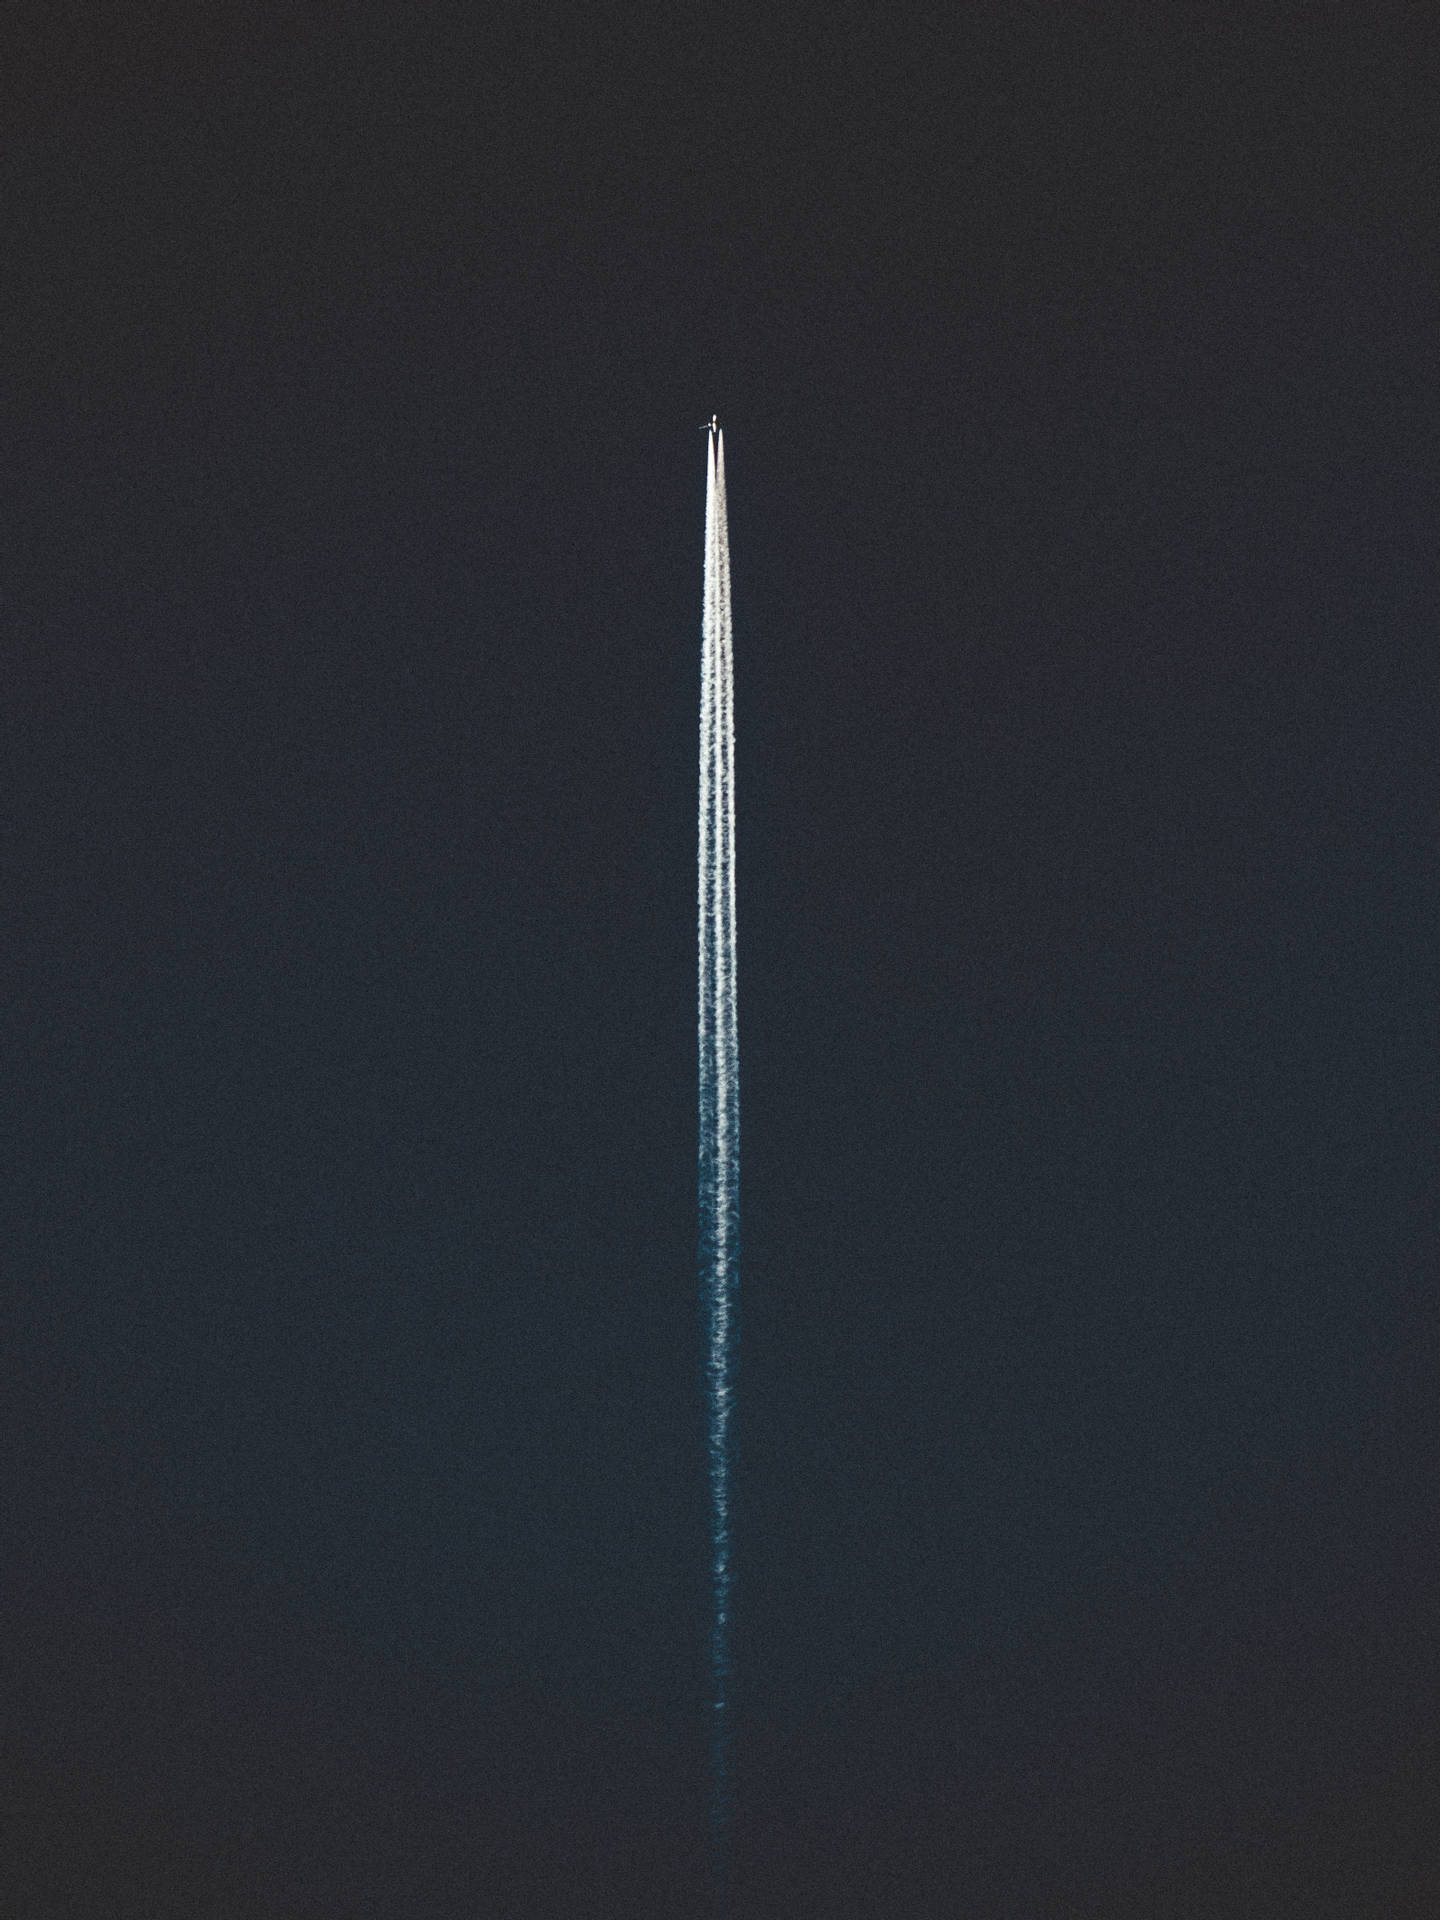 3181X4241 Rocket Wallpaper and Background